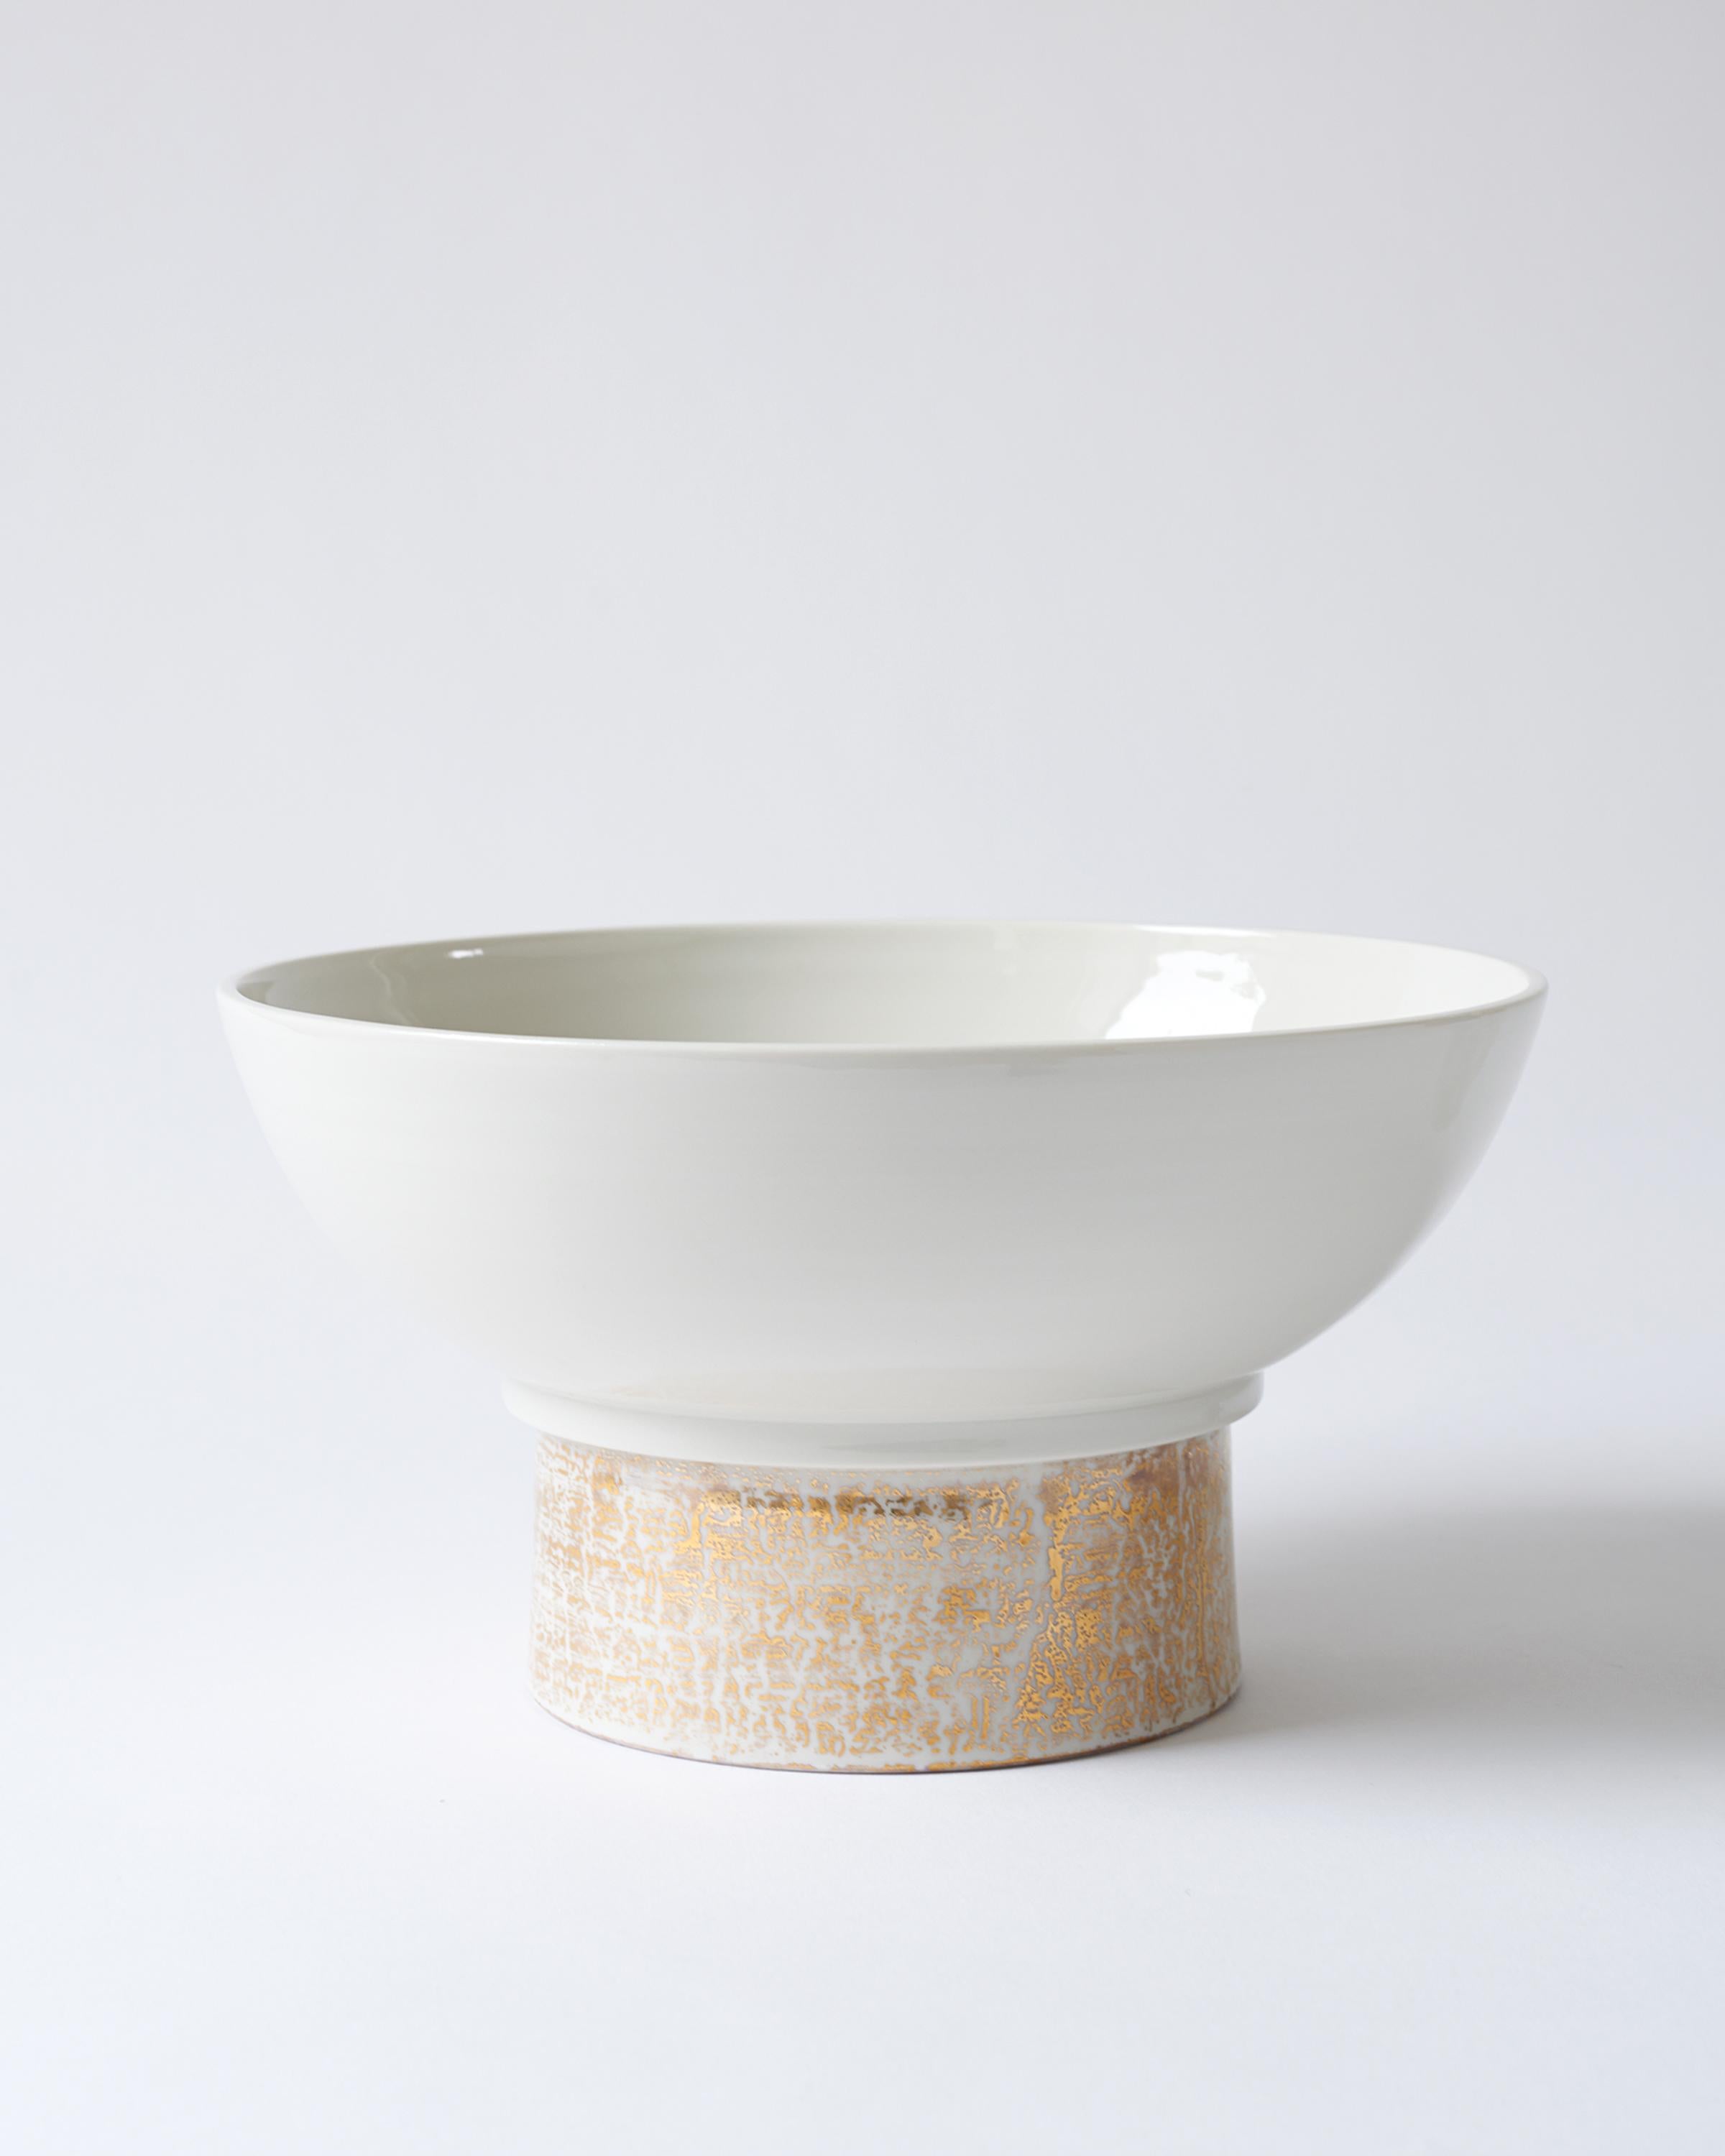 Indonesian Contemporary Porcelain Bowl, Handmade with 24-Karat Gold For Sale